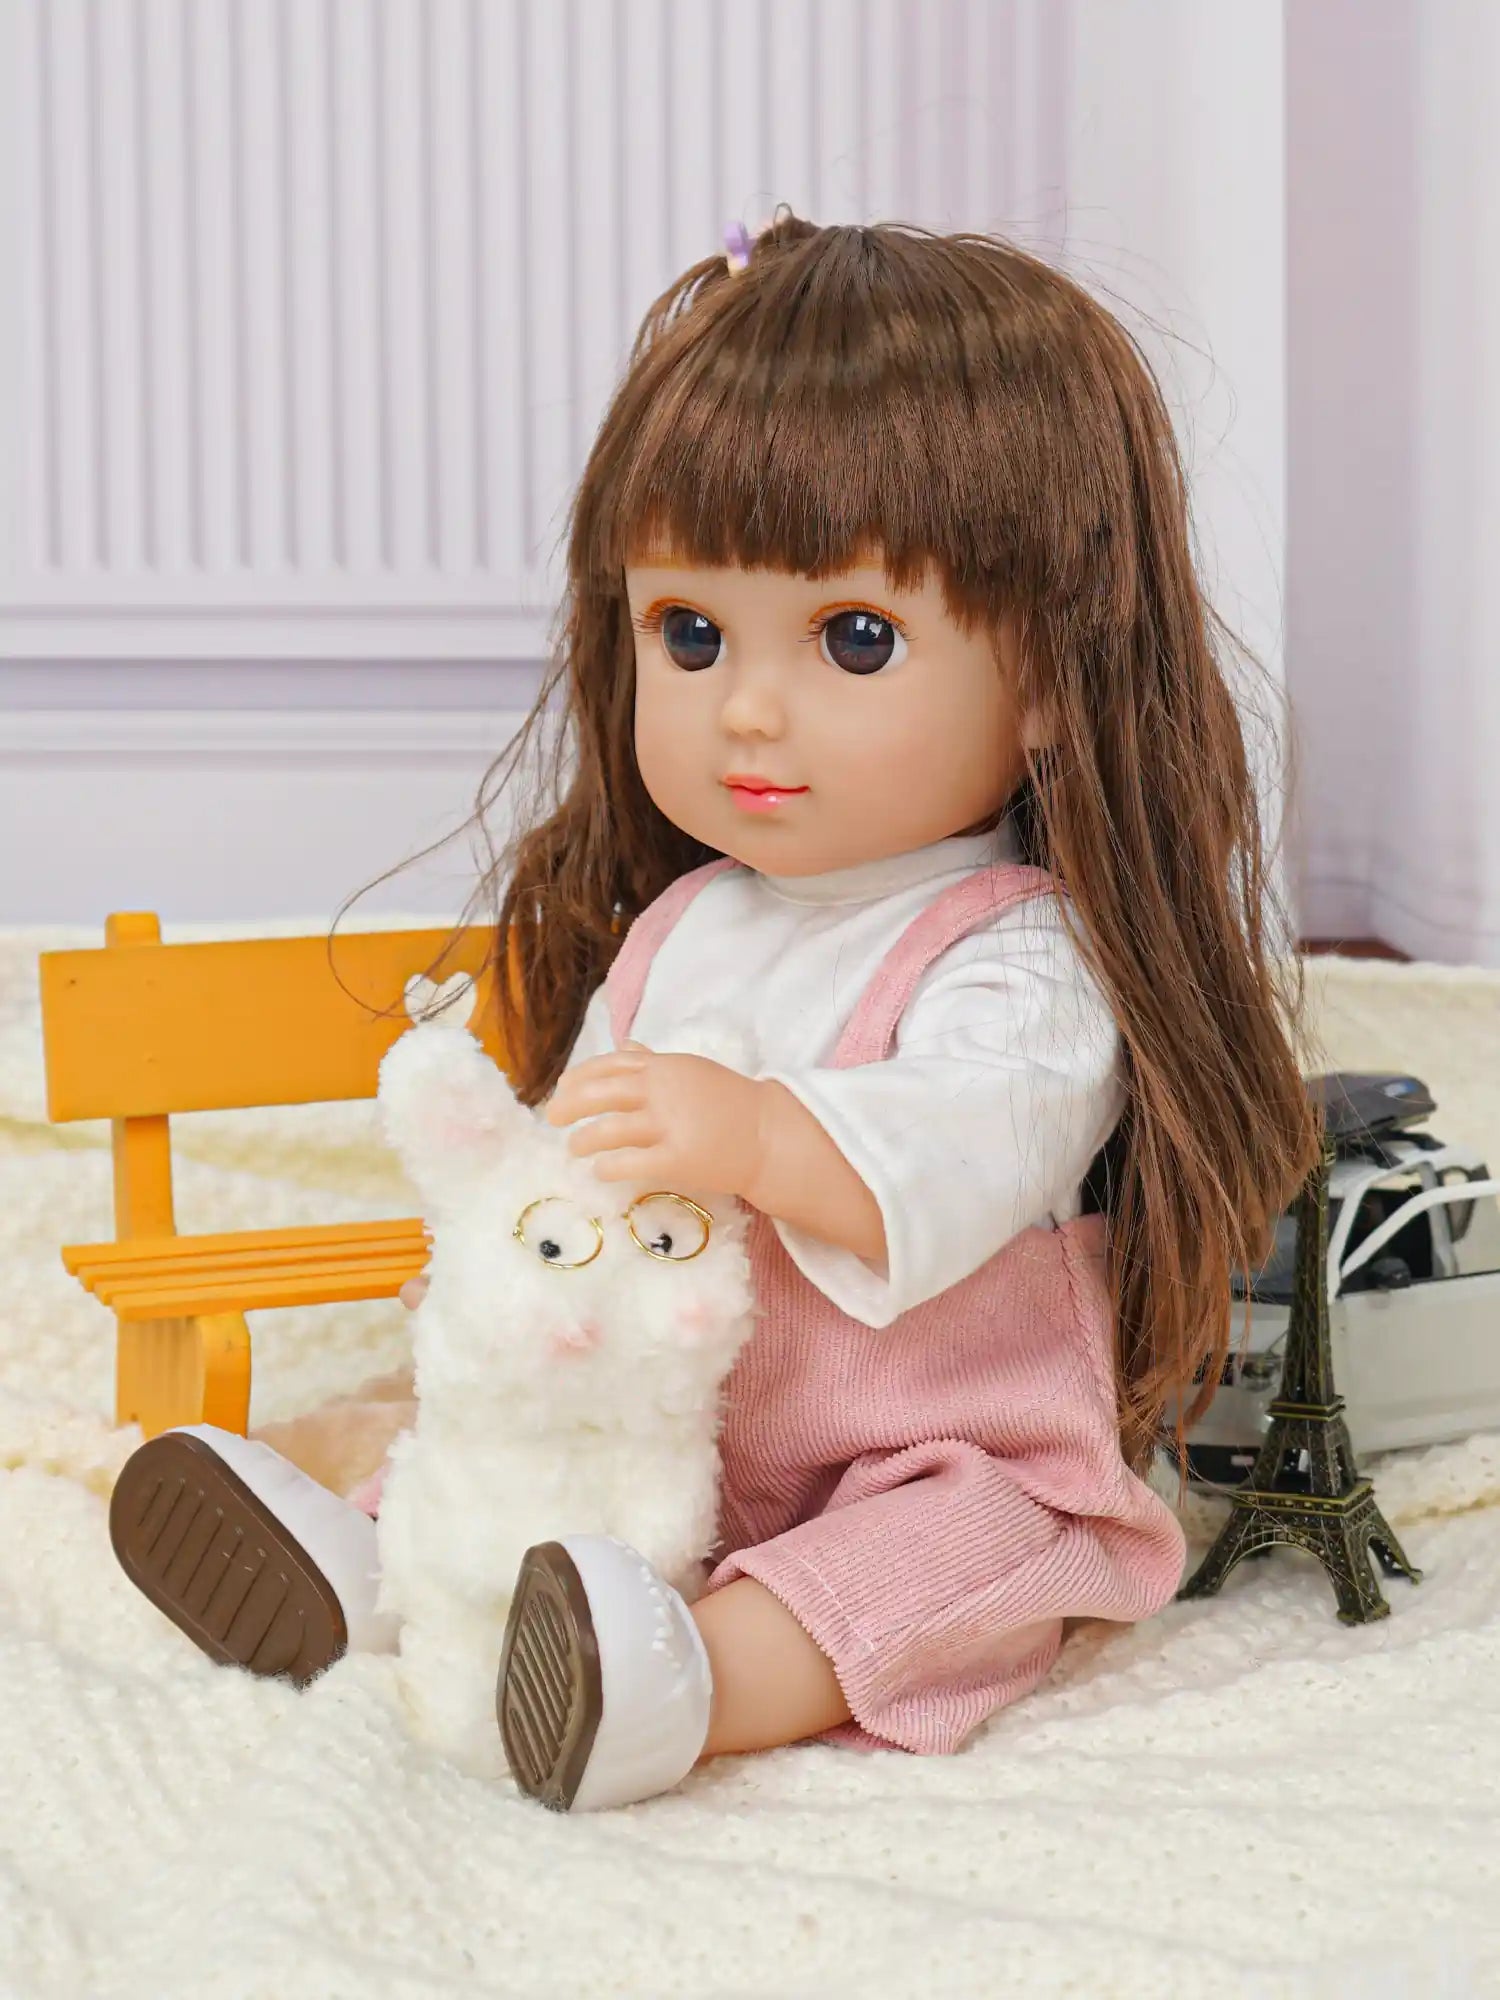 Doll with brown hair and pink overalls, waving, with a toy dog and Eiffel Tower.